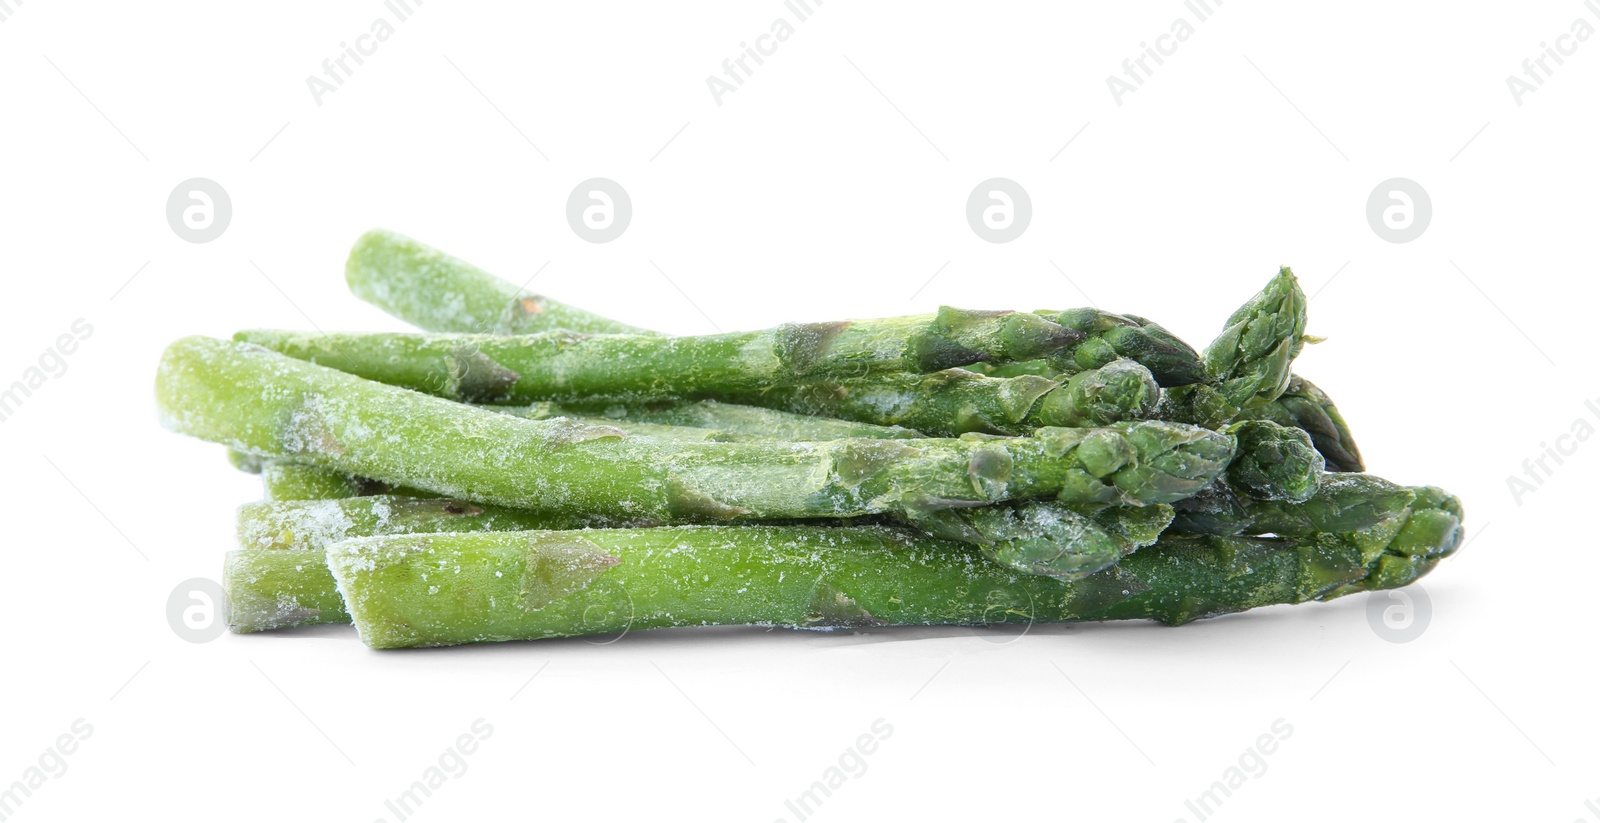 Photo of Frozen asparagus stems on white background. Vegetable preservation